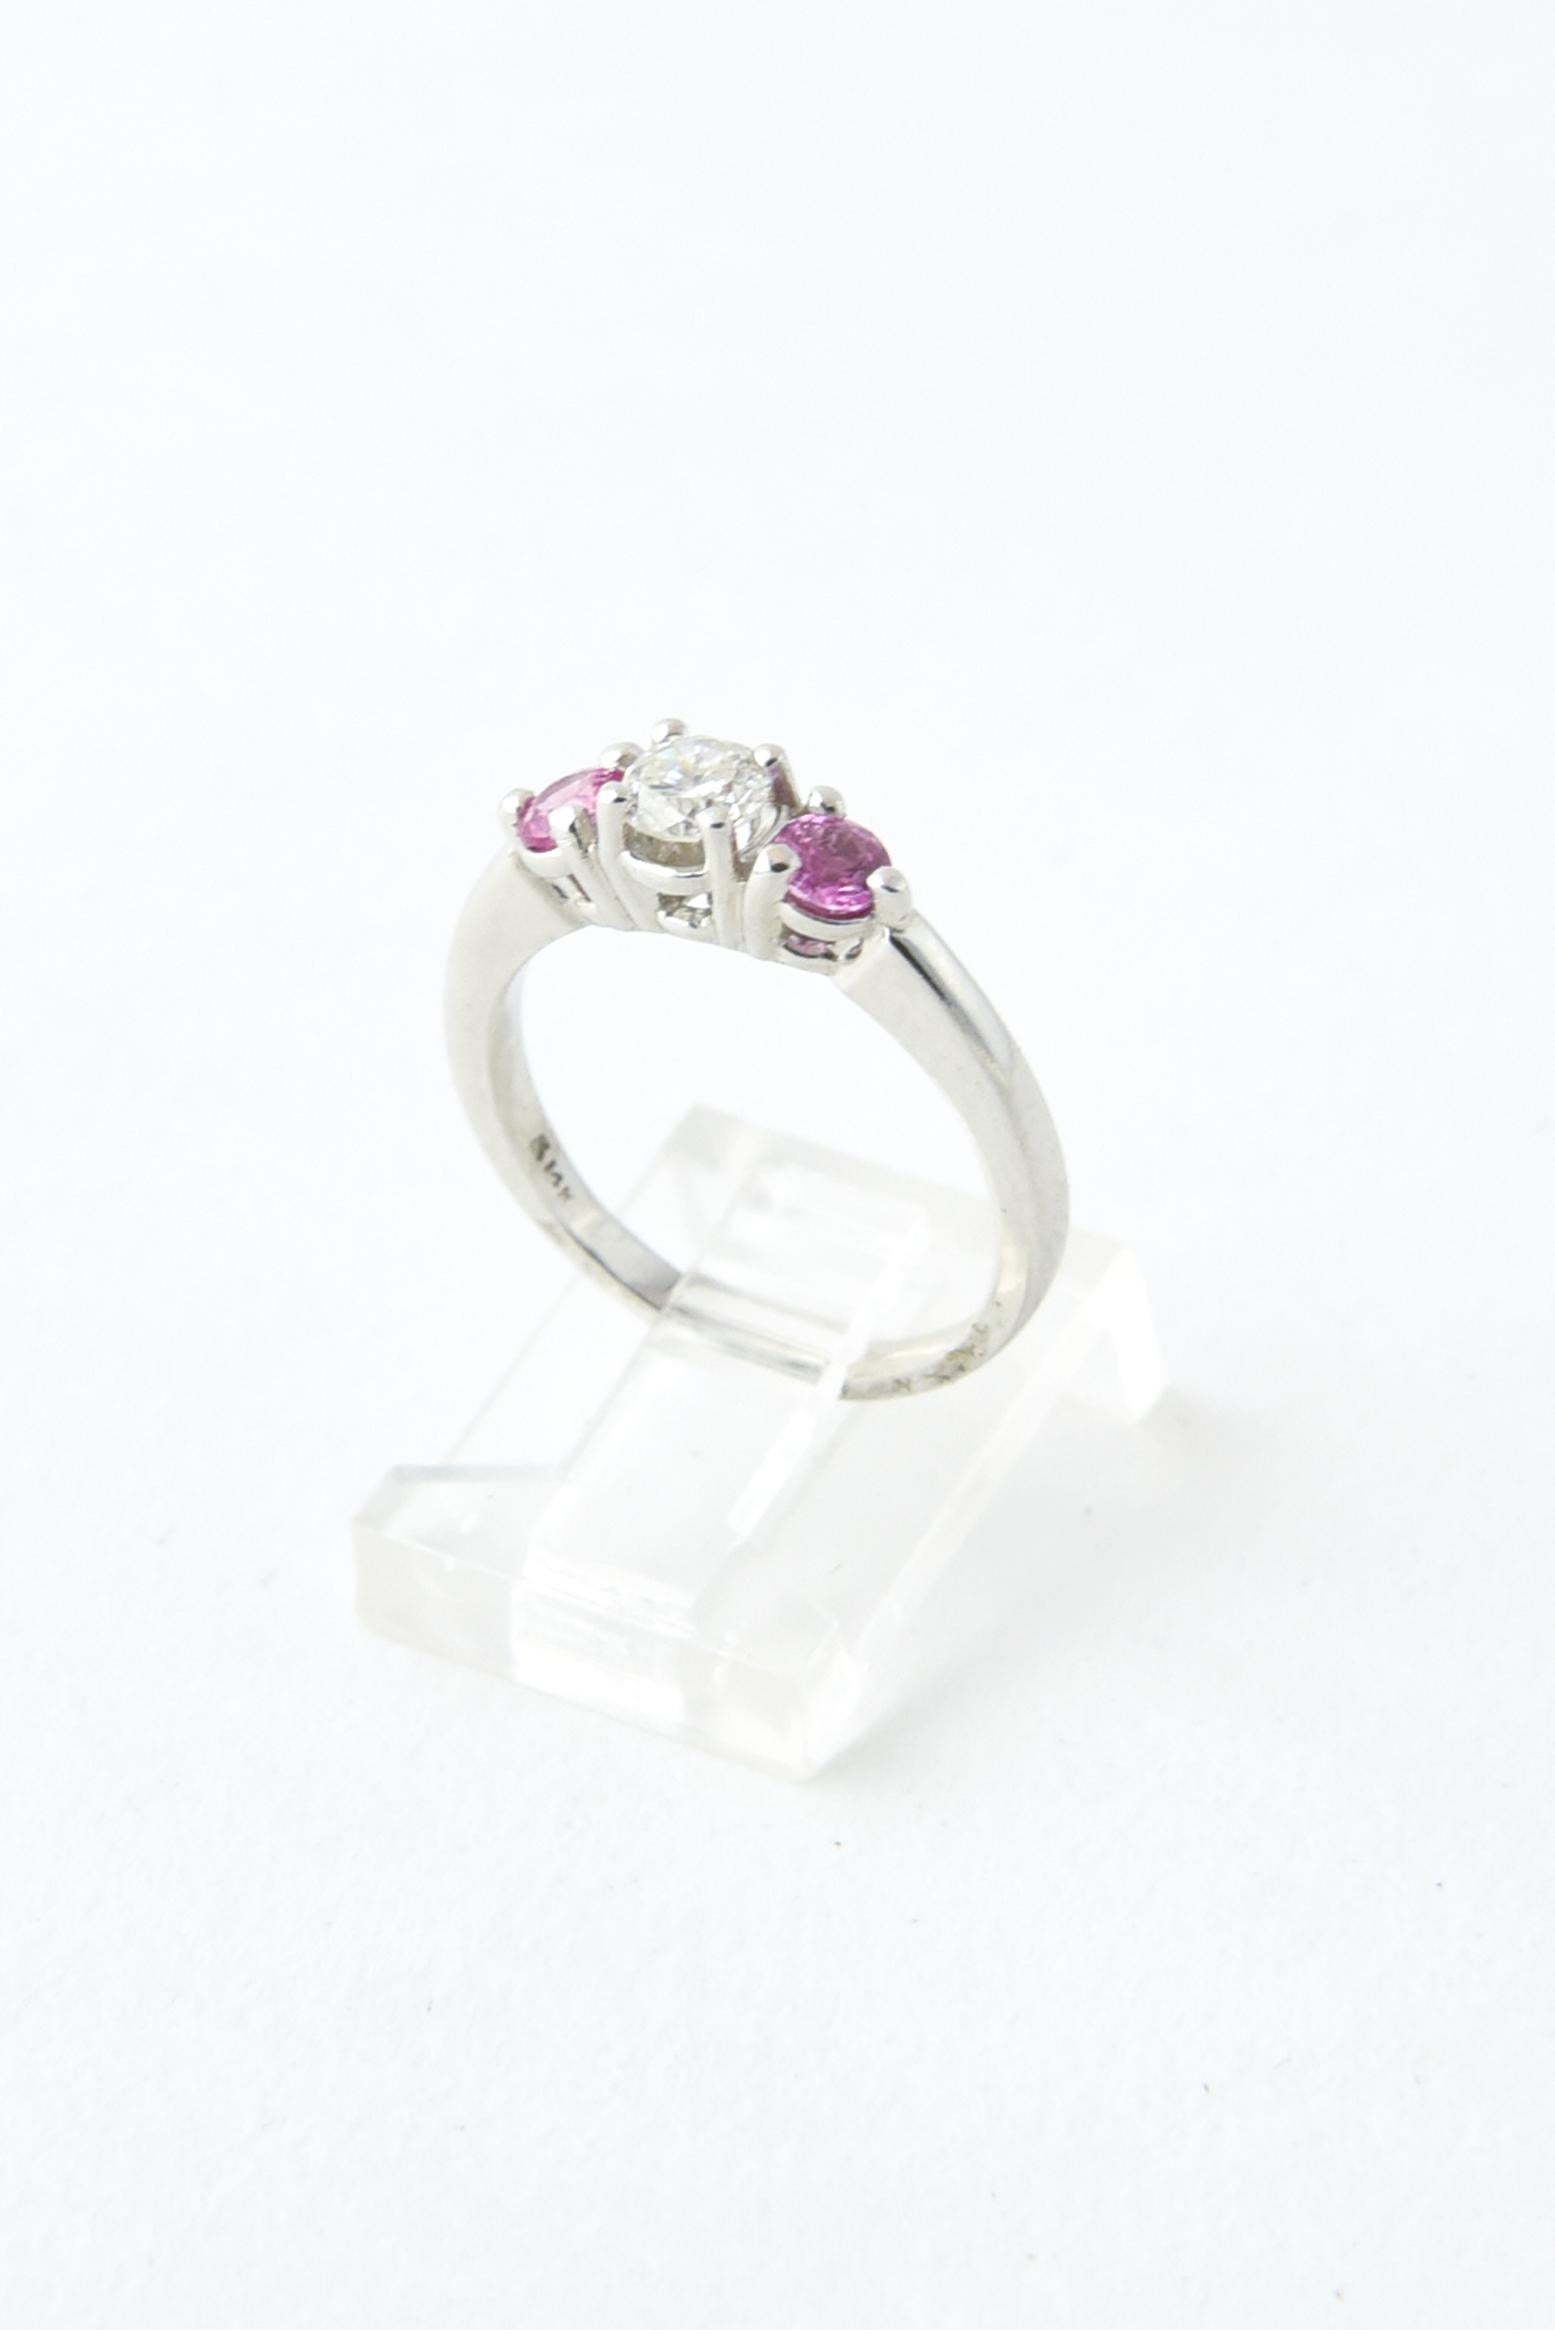 Vintage 14K white gold ring presenting a prong-set 0.50 carat diamond mounted between two 0.20 carat pink sapphires. 
US size: 6.75; can be resized.